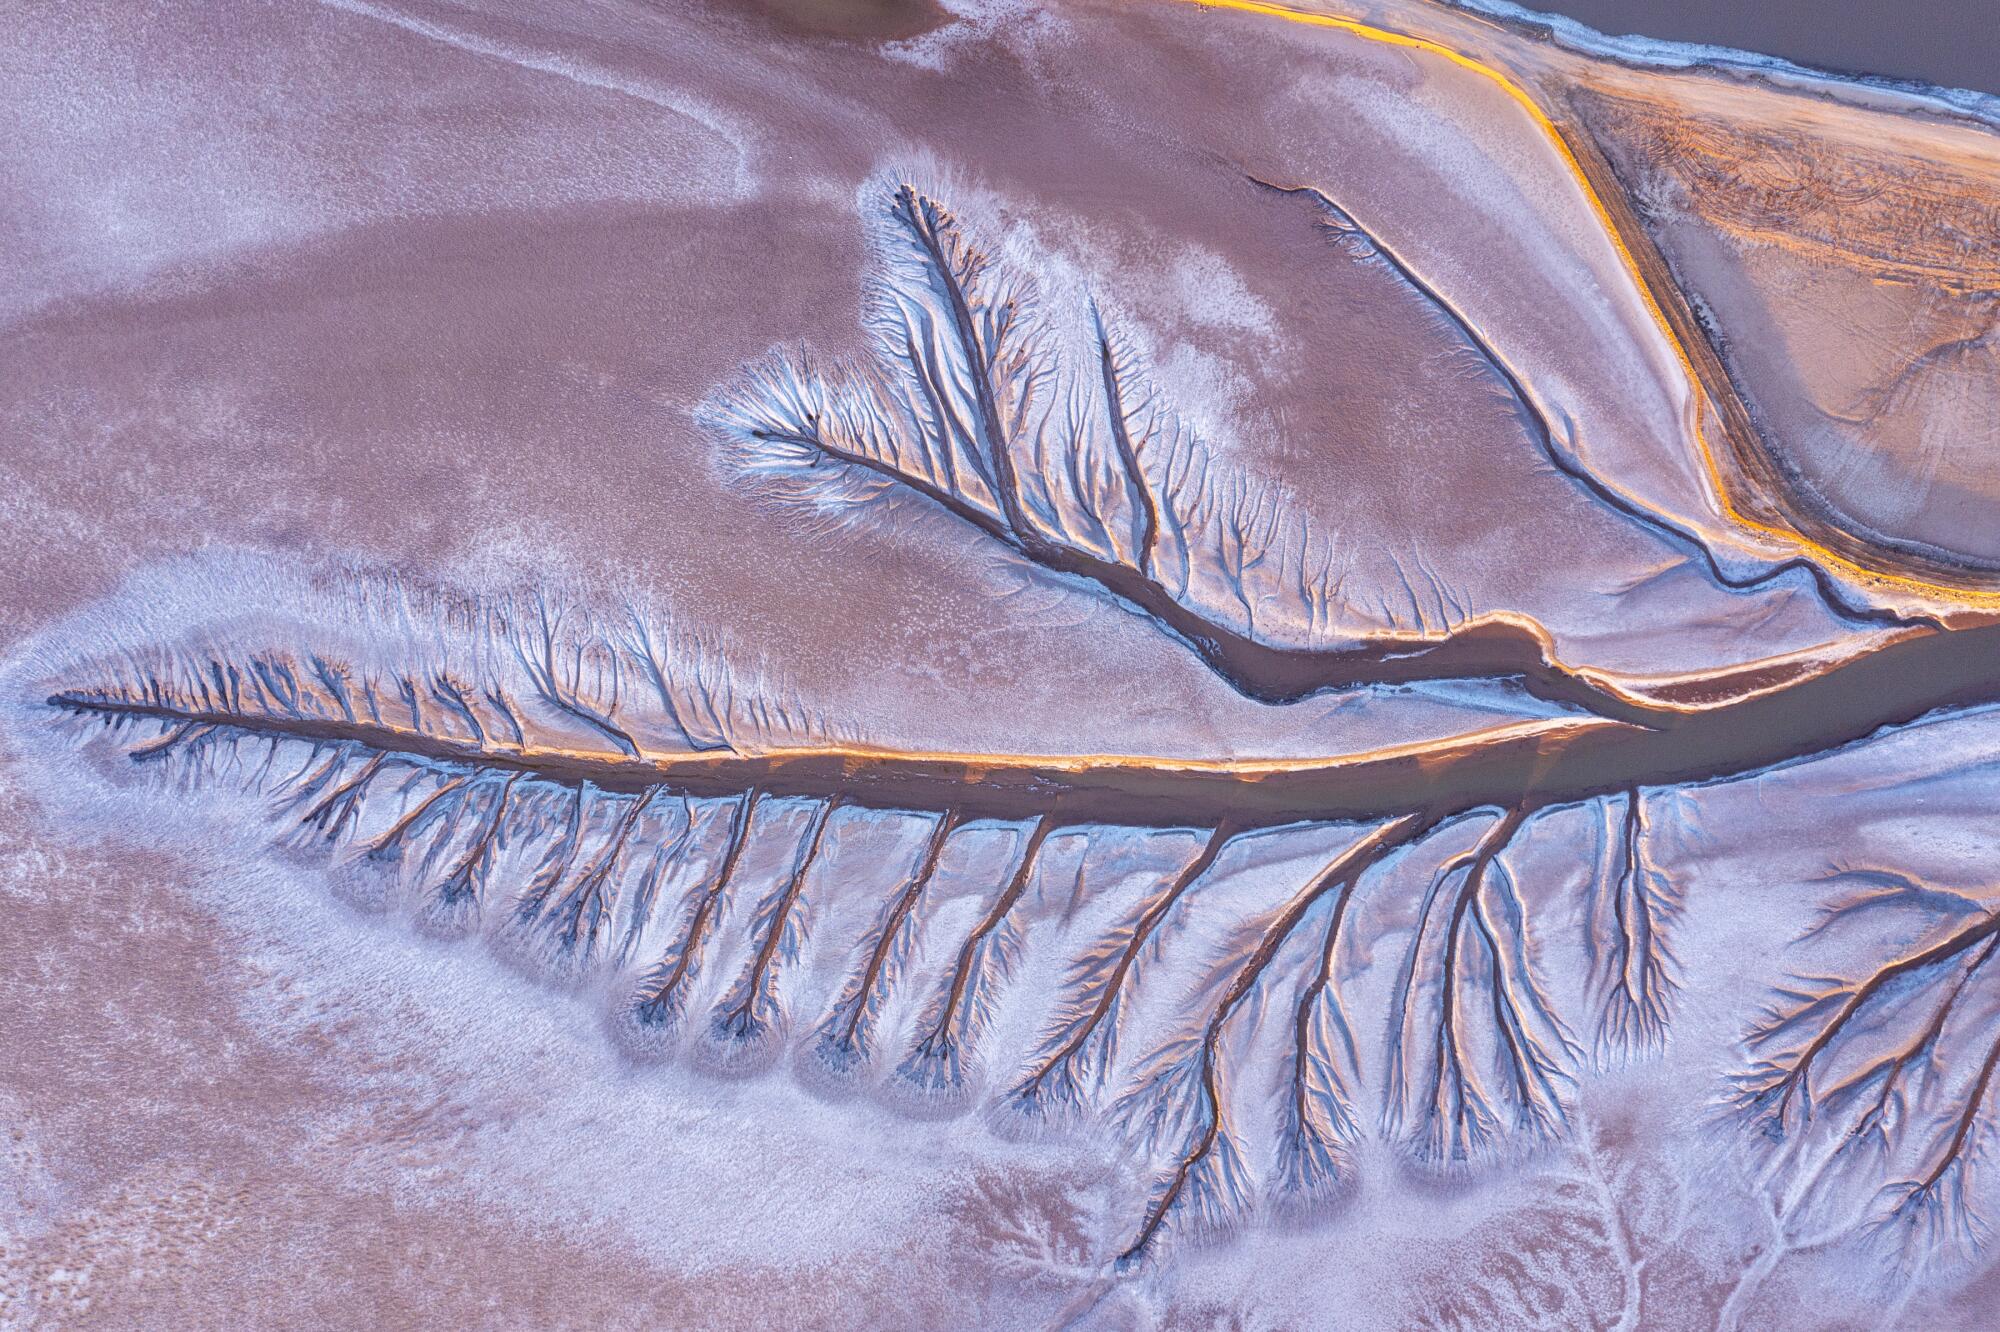 Tentacles formed by the ebb and flow of tides etch a pattern into mud in the Colorado River Delta in Mexico.